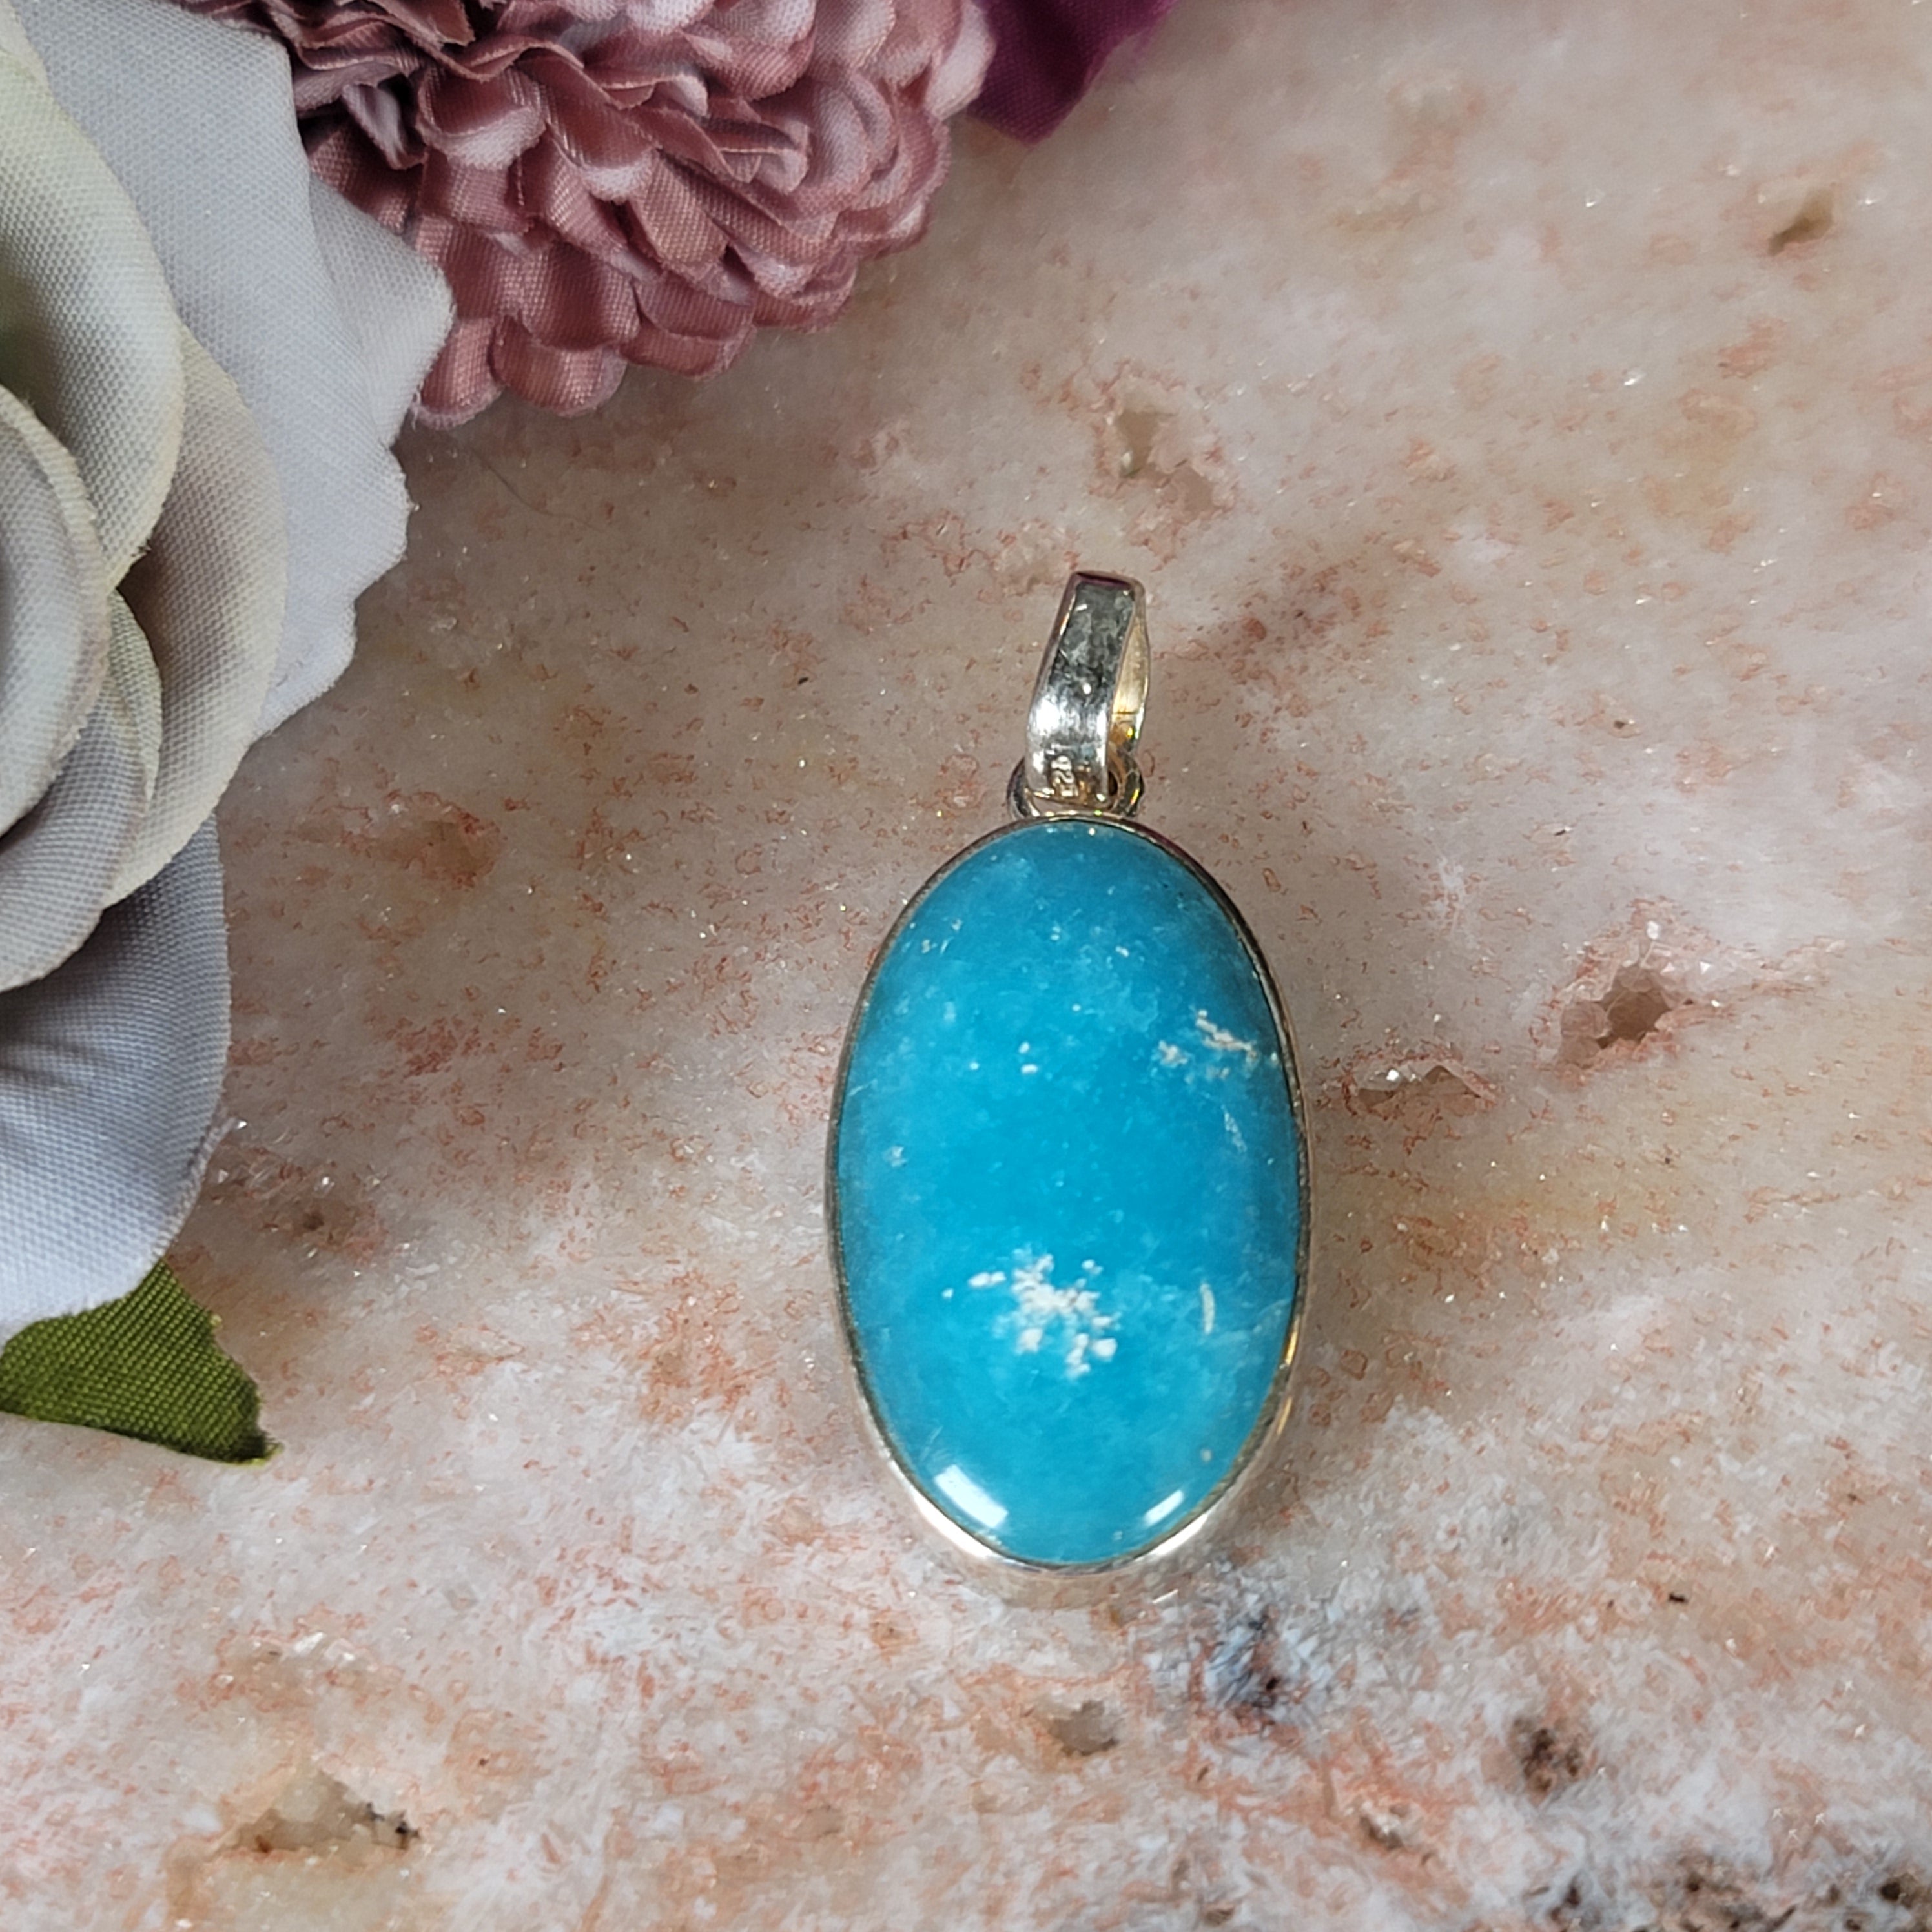 Hemimorphite Pendant .925 Silver for Enhanced Healing, Protection Against Malicious Intentions & Well-being